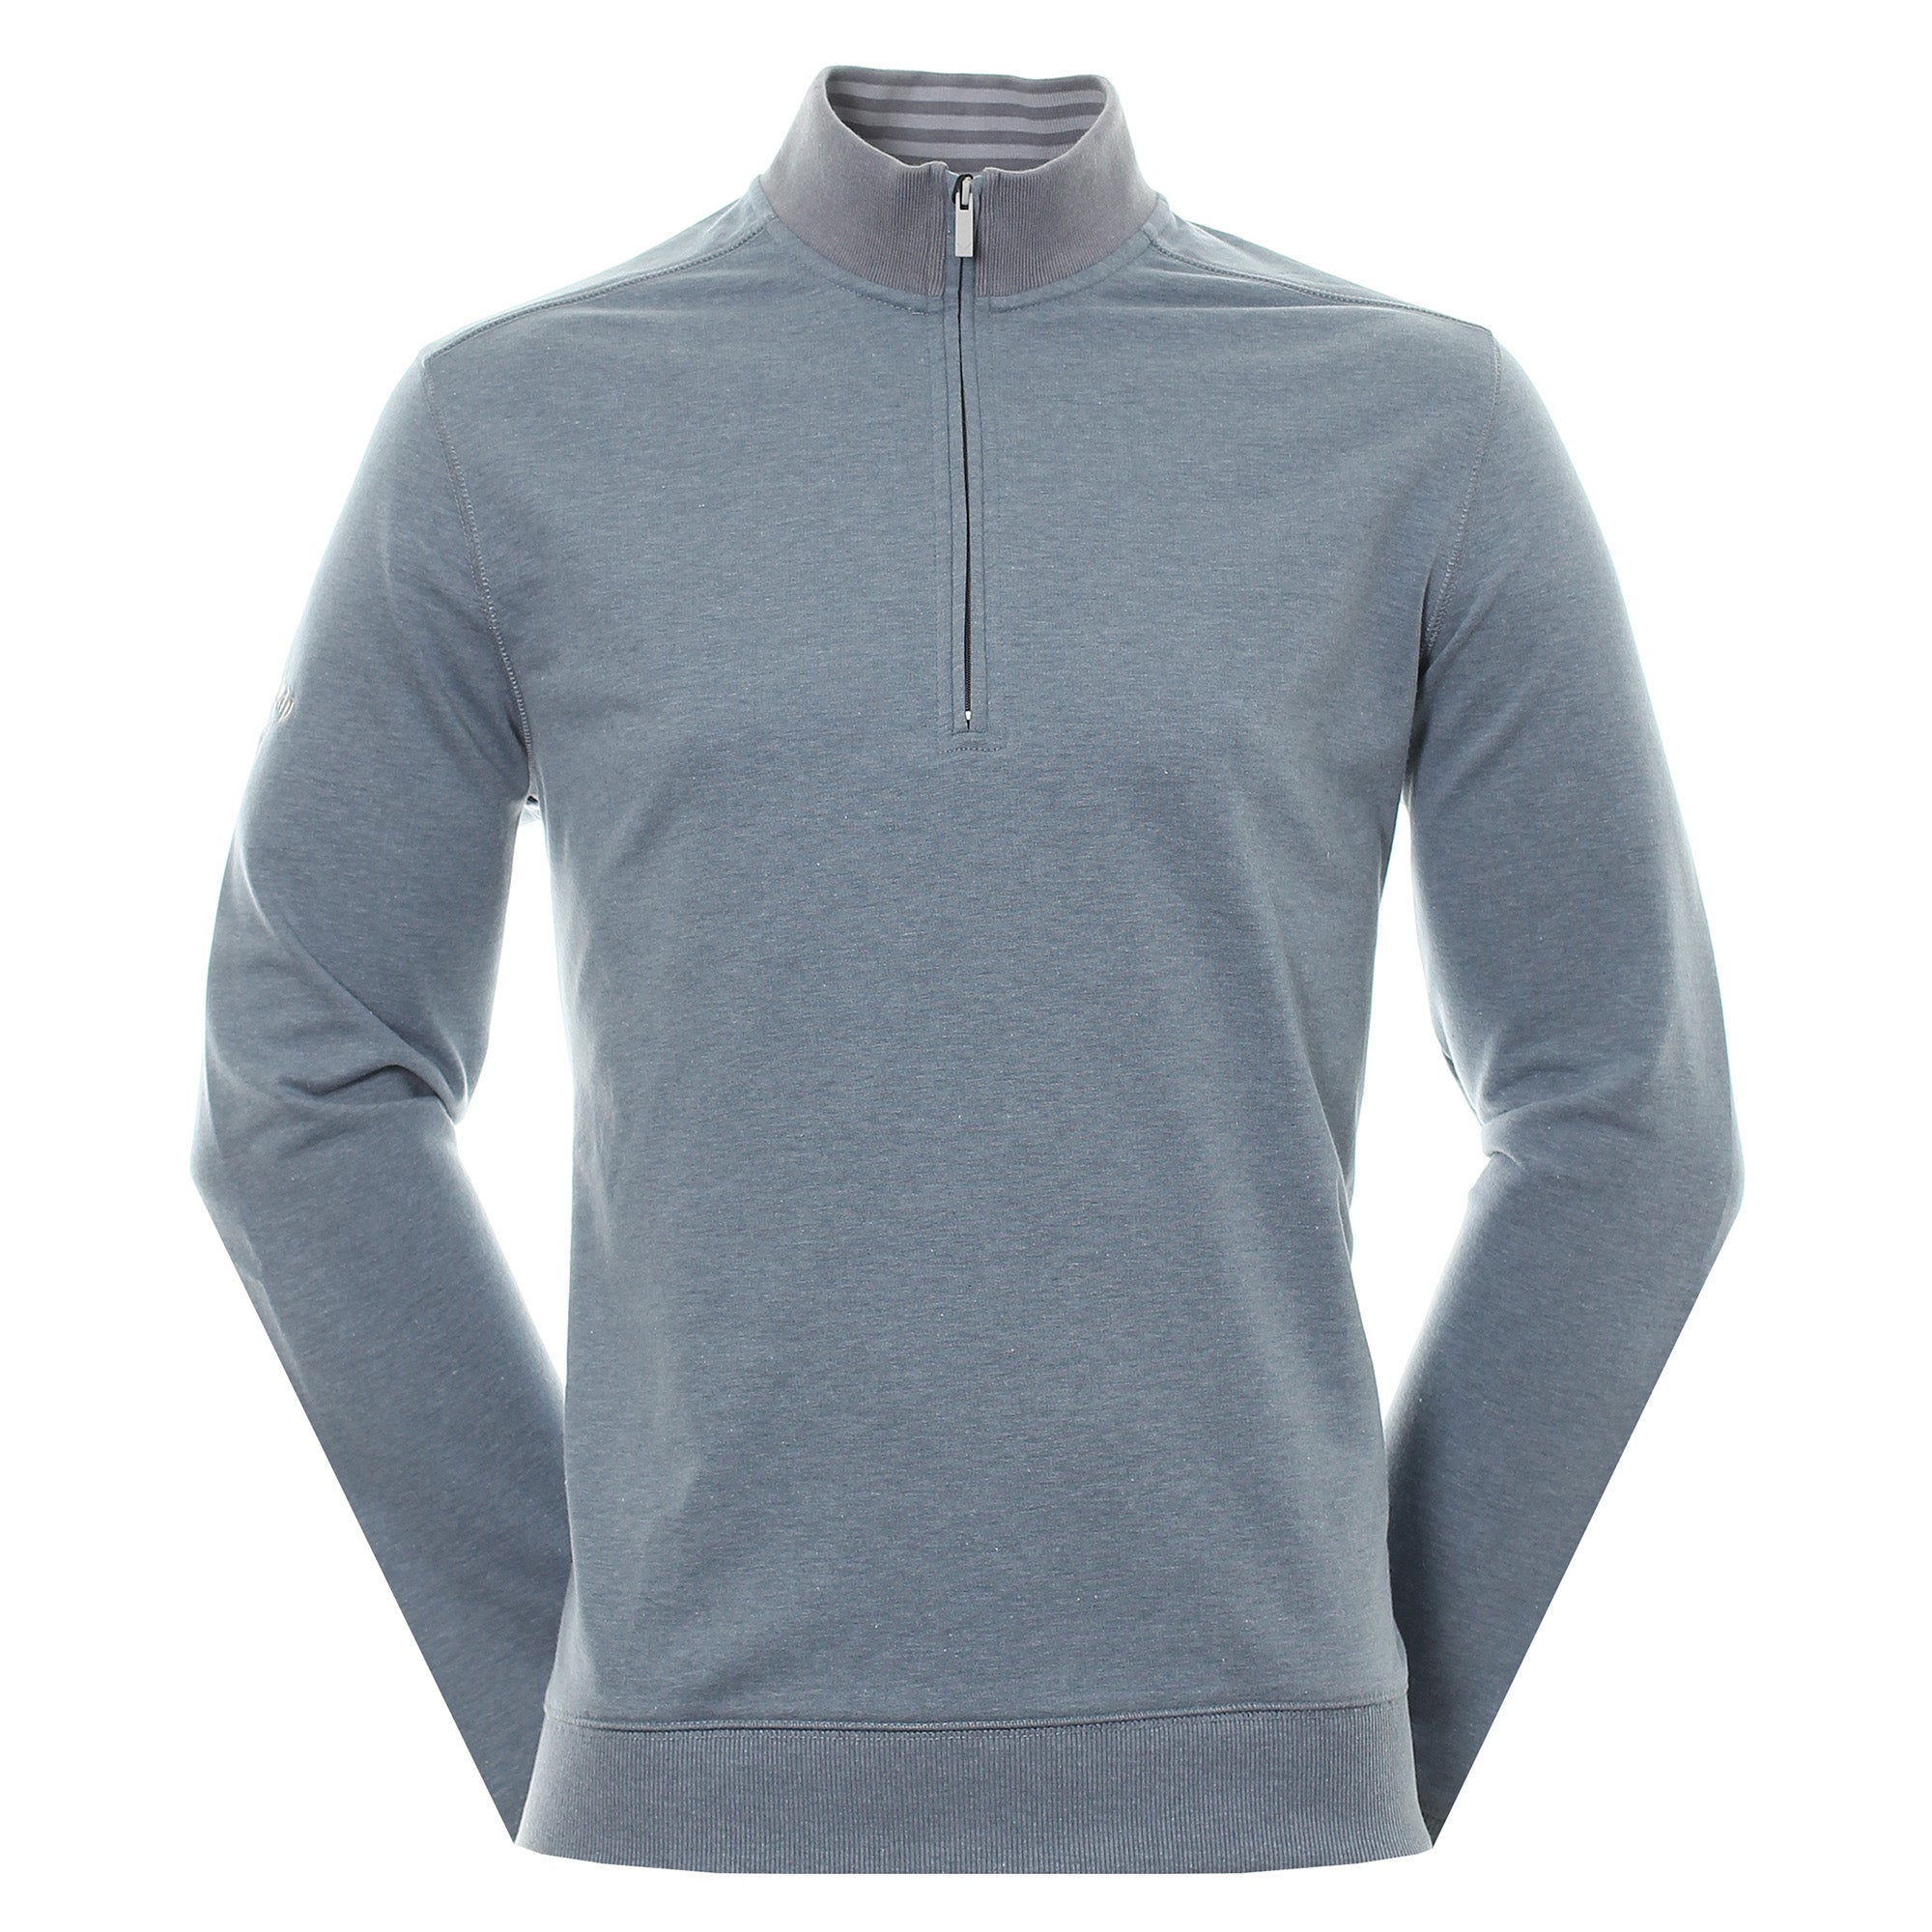 Callaway Golf French Terry Pullover CGKF90C3 Heather Grey 096 & Function18